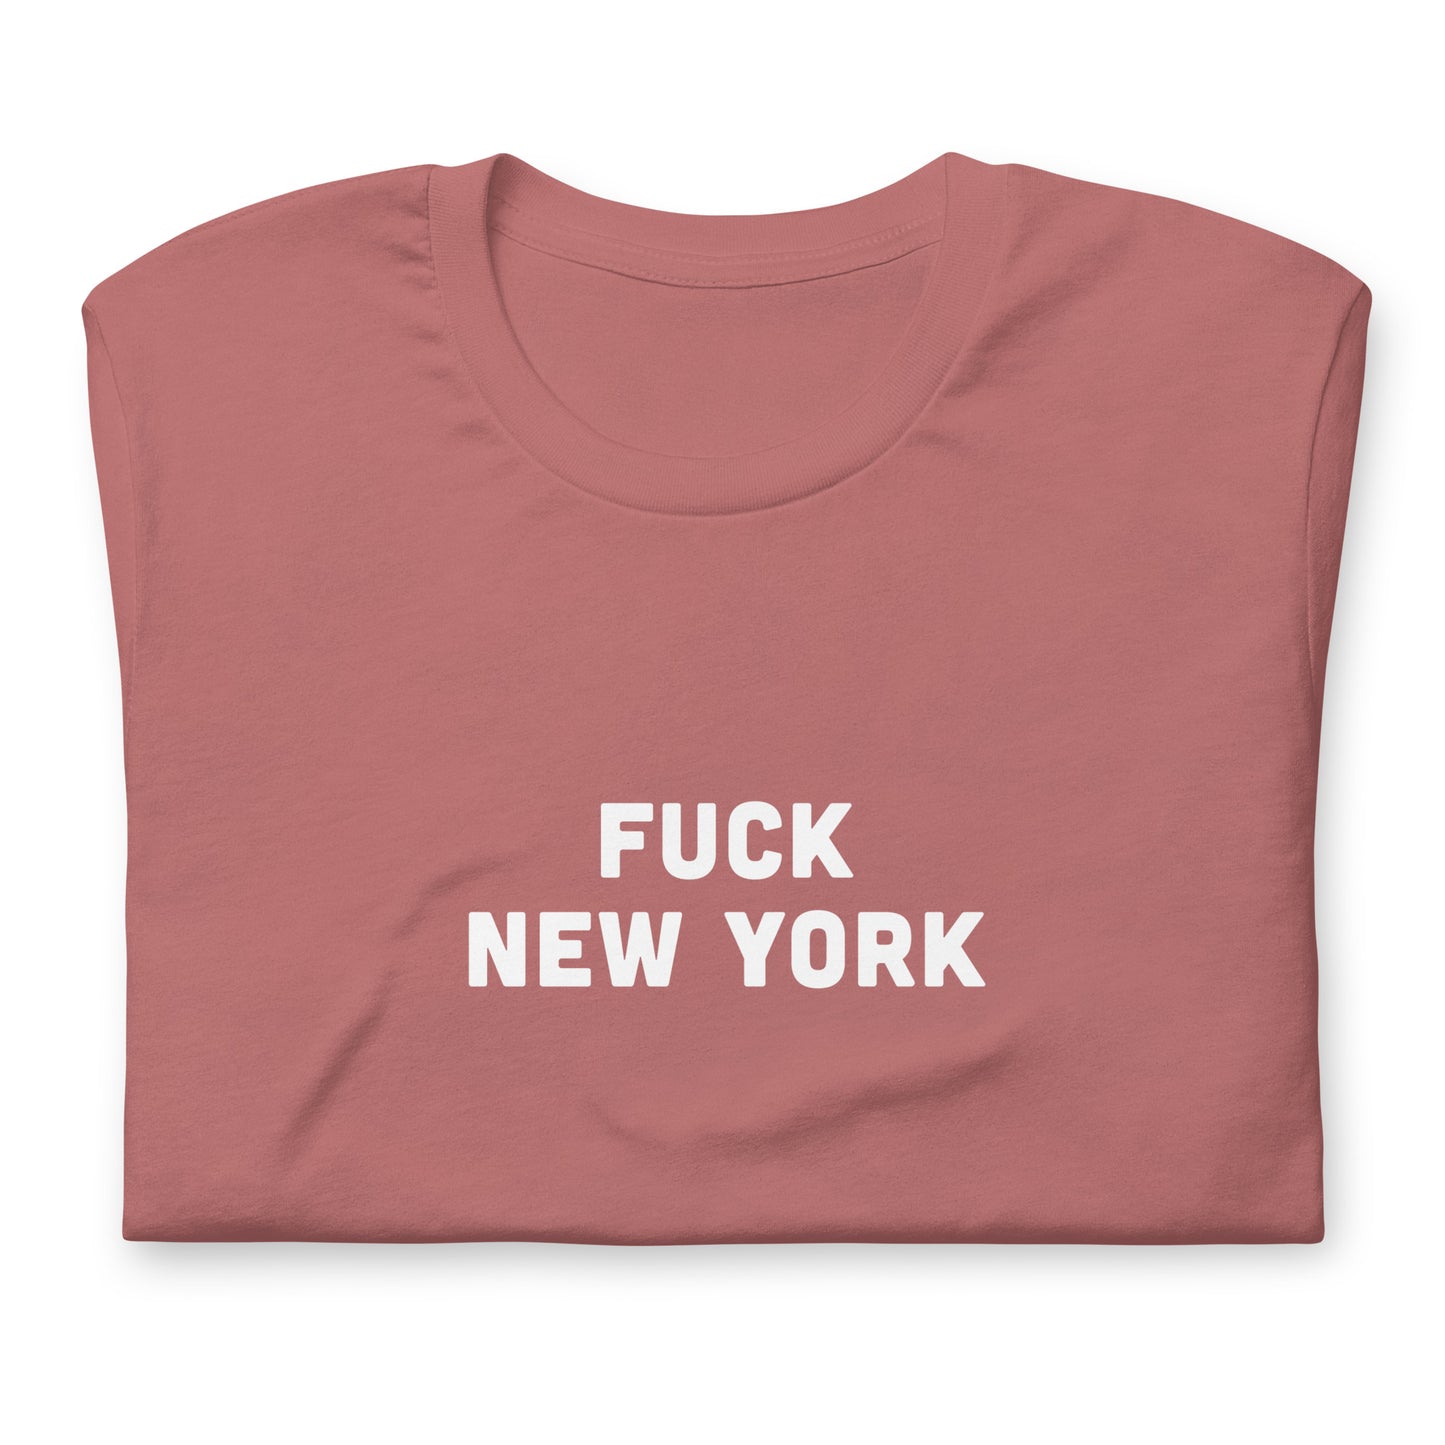 Fuck New York T-Shirt Size XL Color Navy